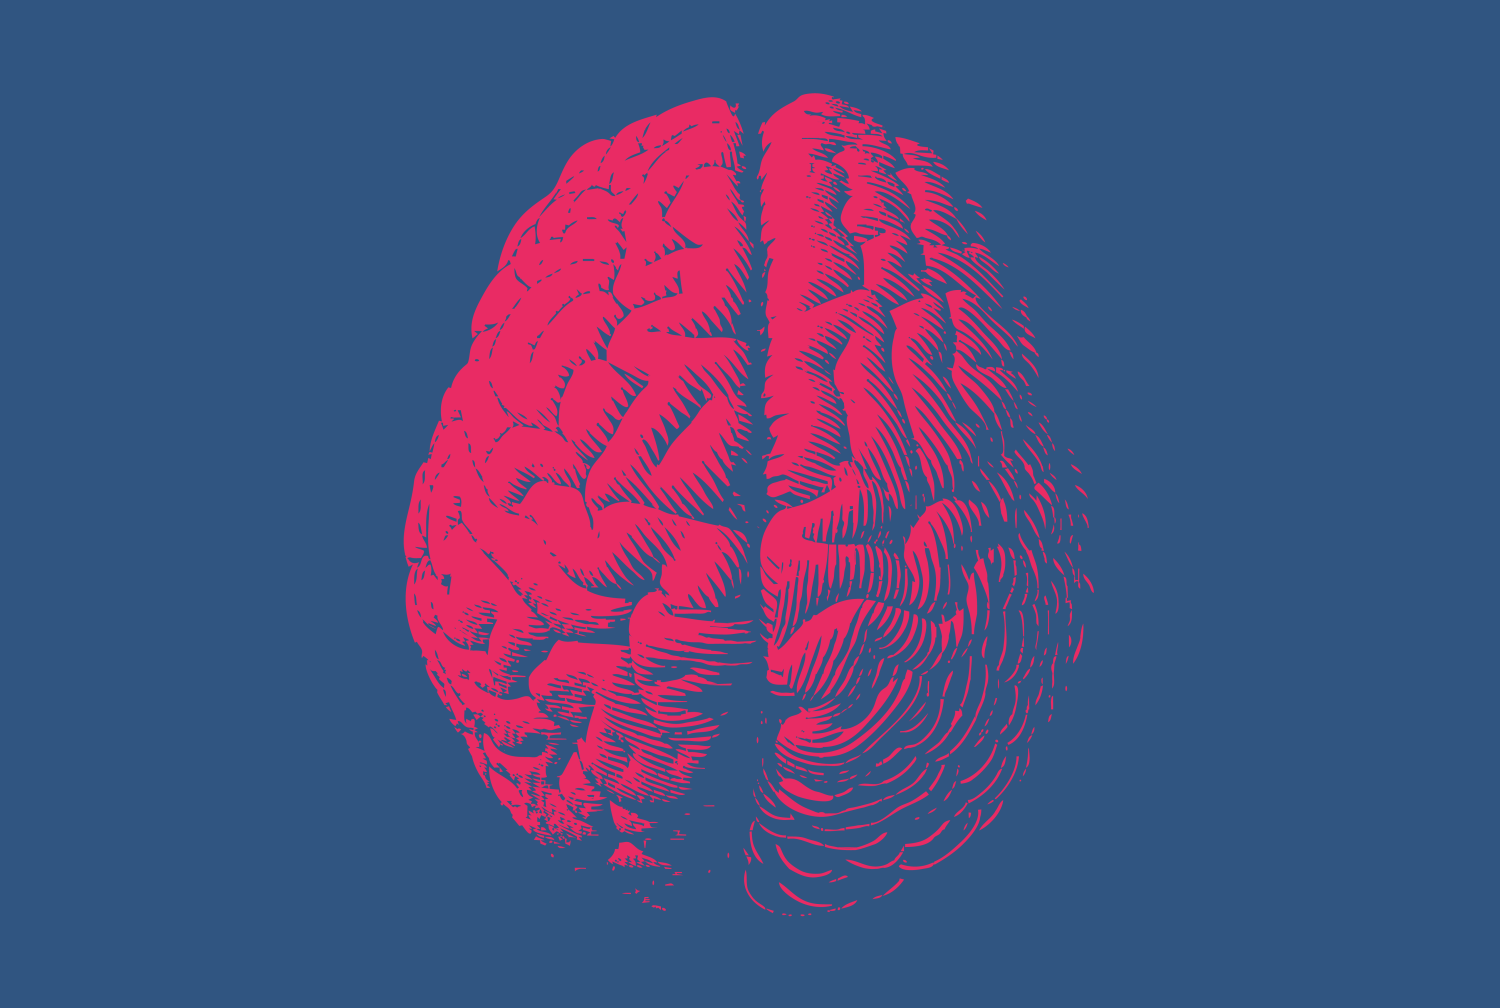 drawing of brain in red ink on blue background